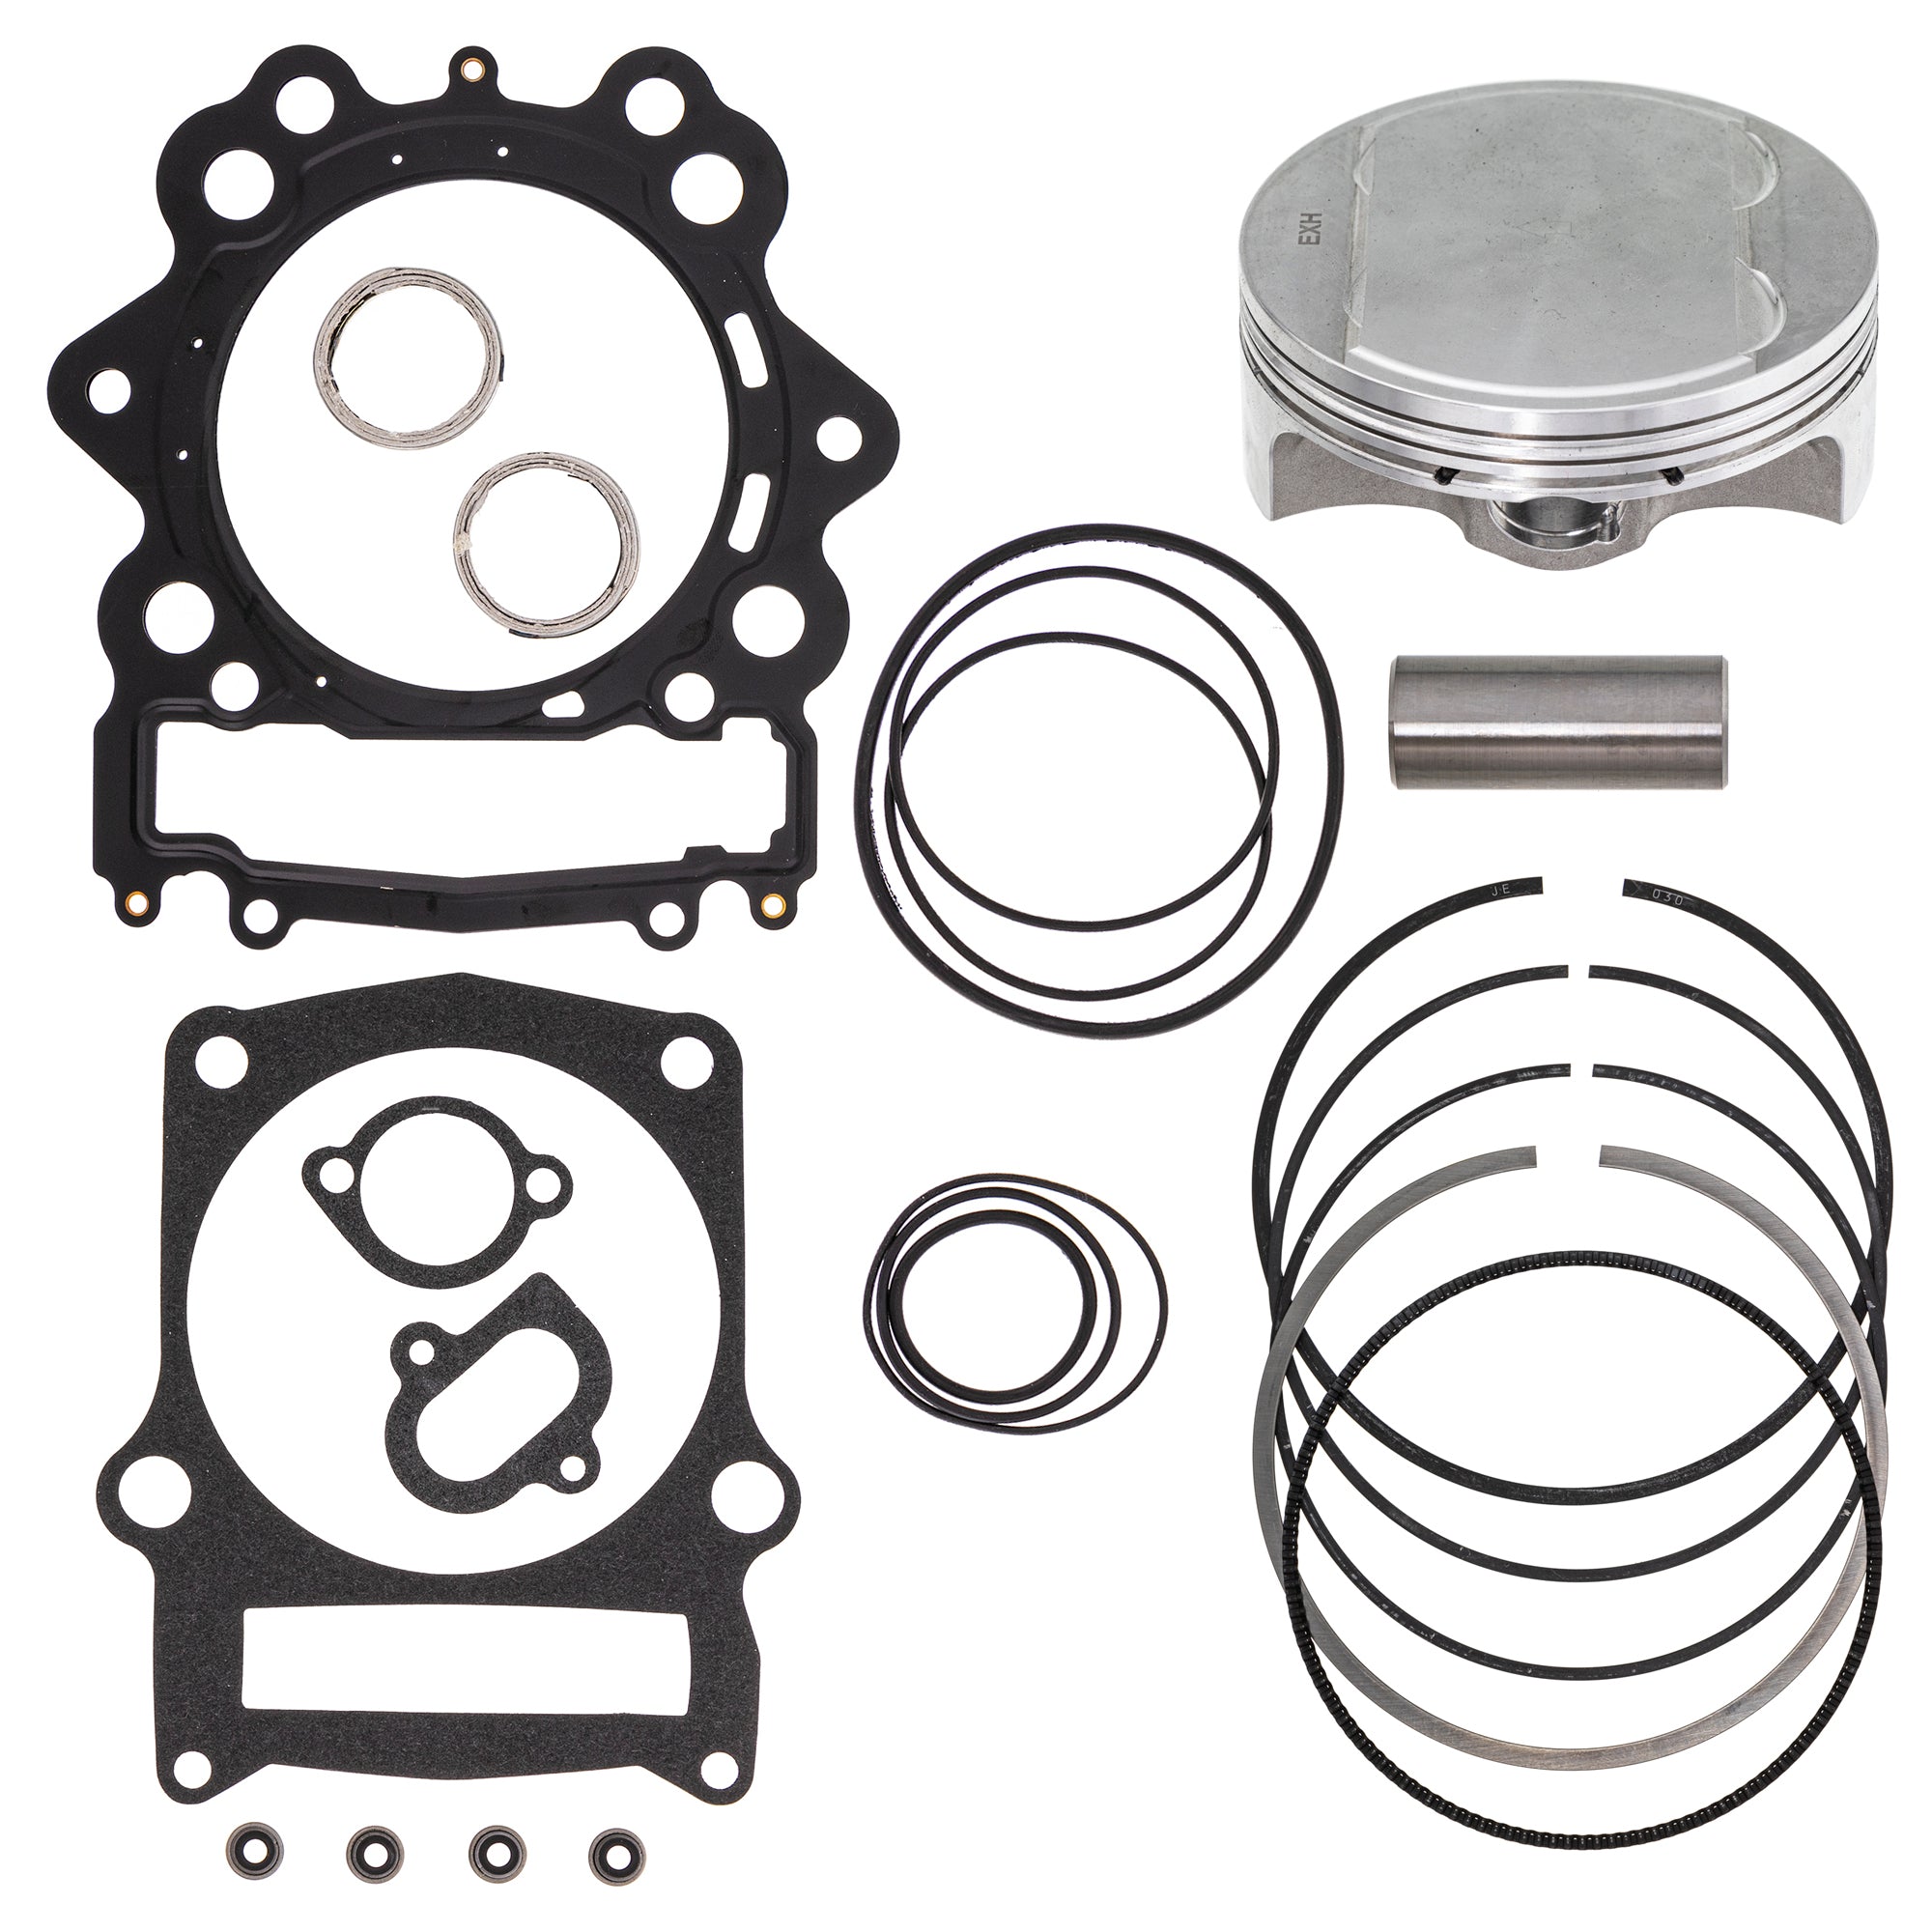 Big Bore Top End Repair Kit for zOTHER Yamaha Viking Rhino Raptor Grizzly 93210-96601-00 NICHE MK1001157